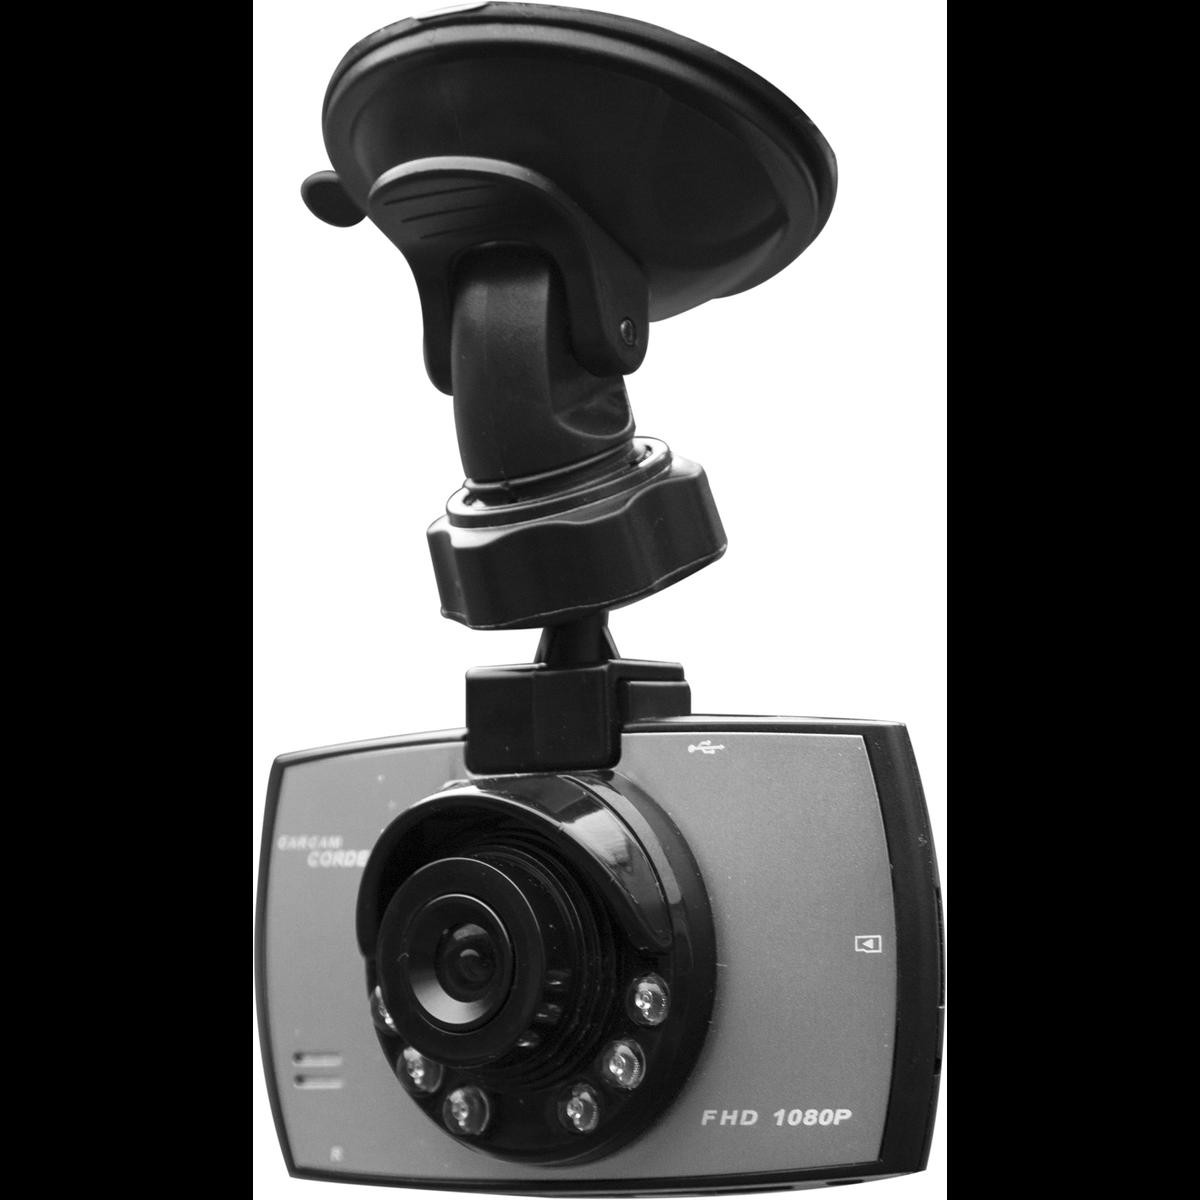 START 8938 In-car cameras VW Golf 4 (1J1) 1920 x 1080, Viewing Angle 170°